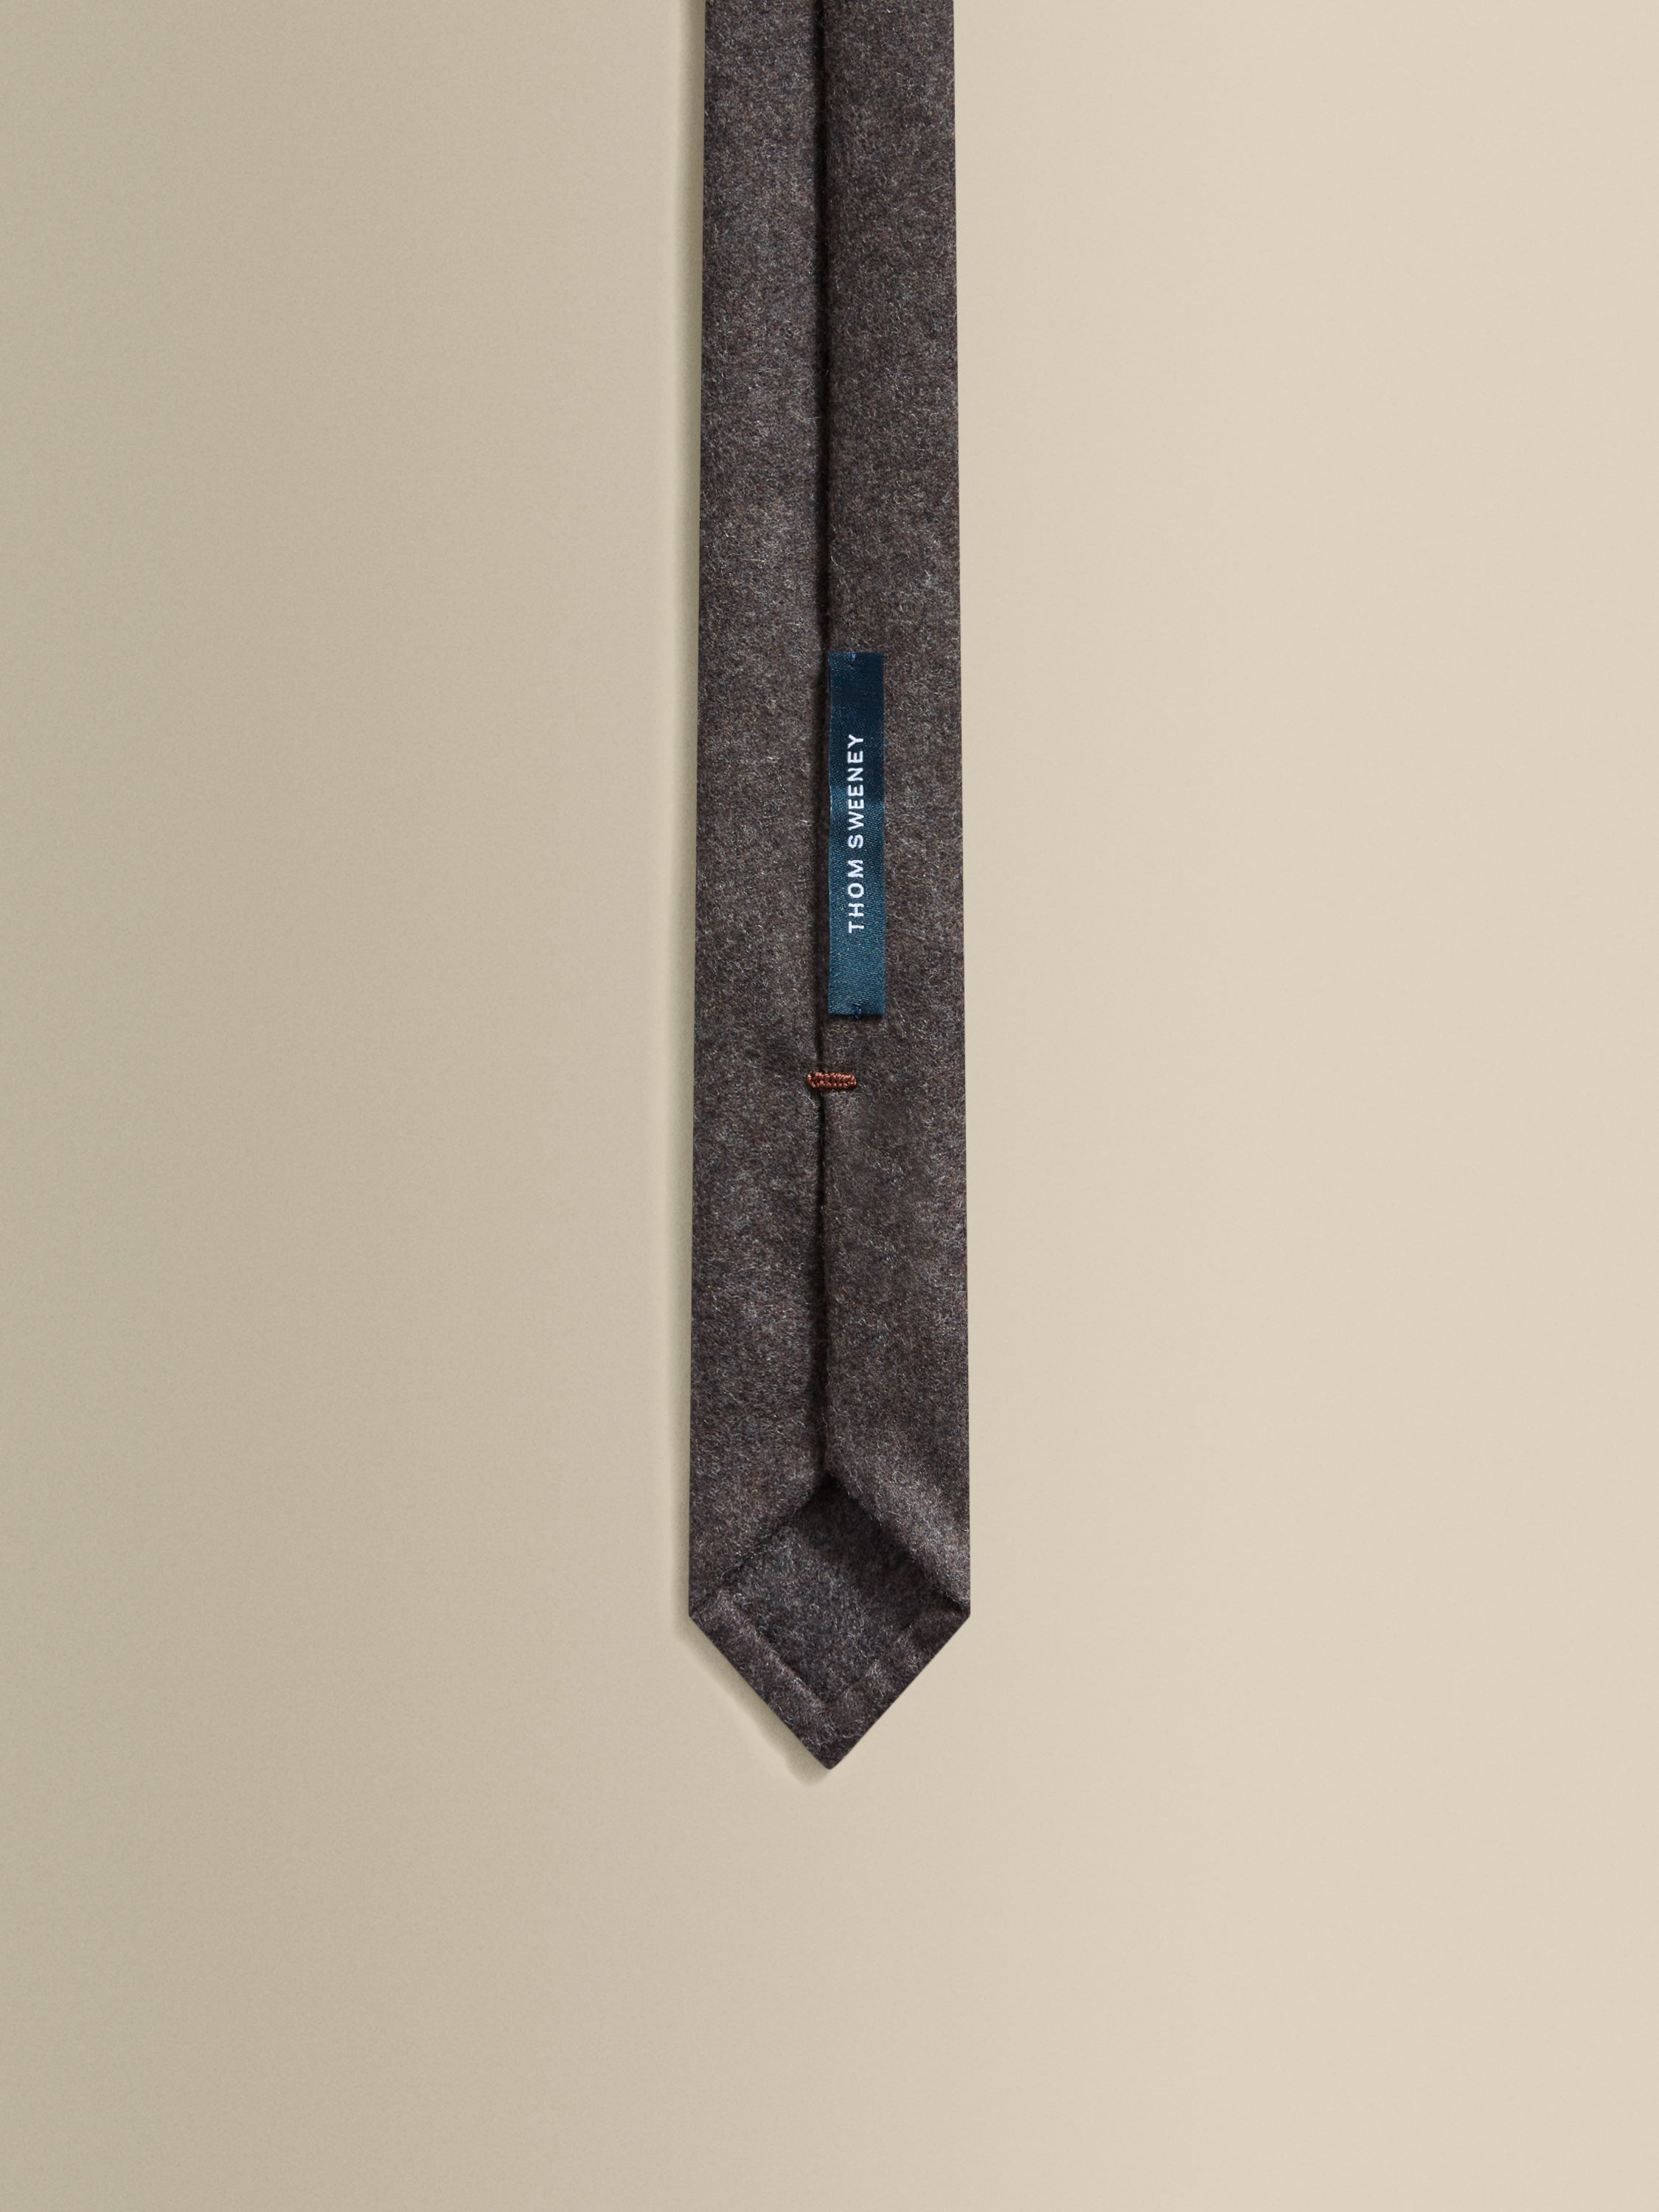 Cashmere Tie Brown Inside Product Image